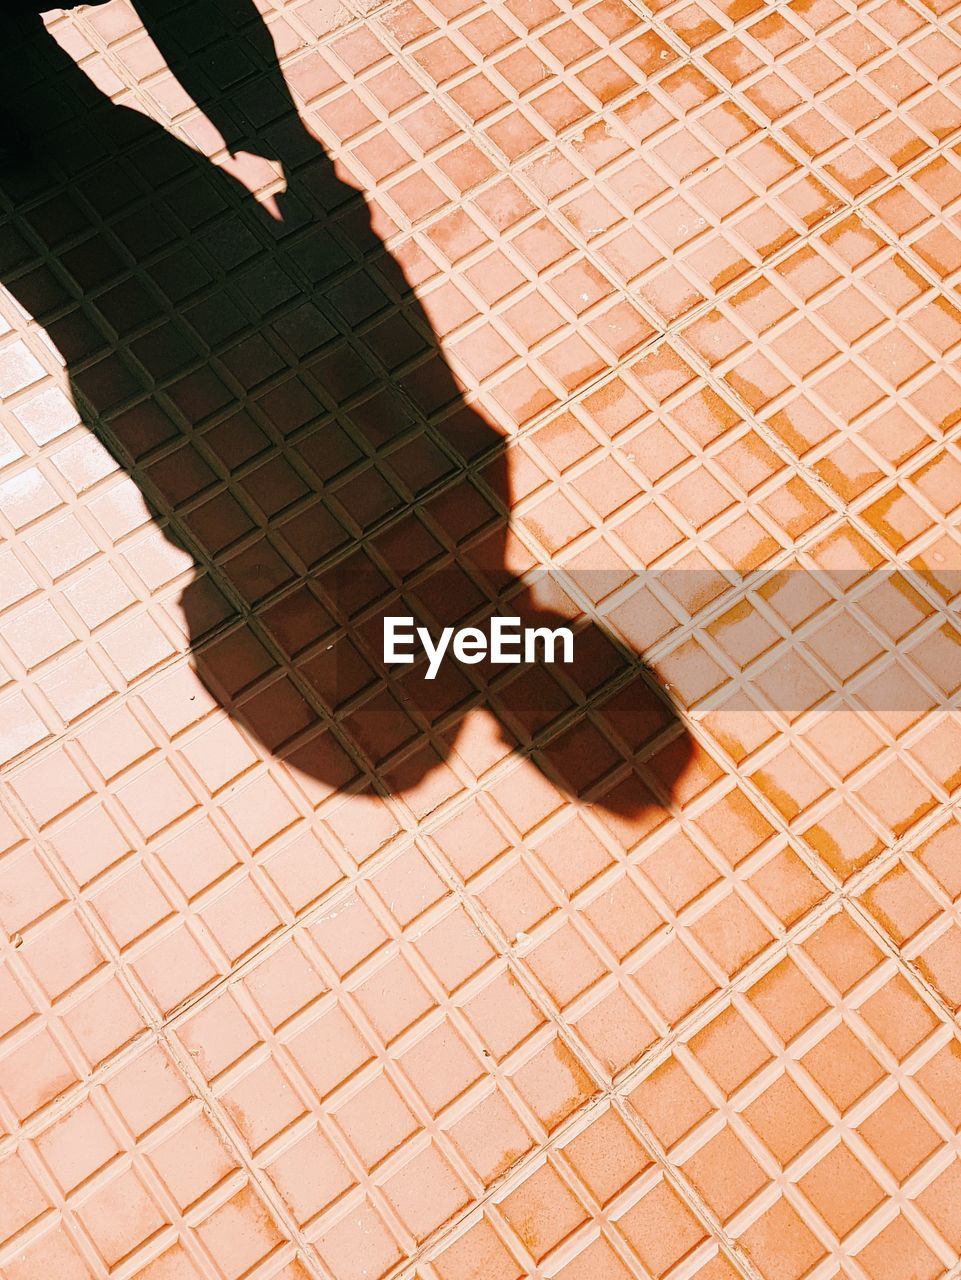 HIGH ANGLE VIEW OF SHADOW OF MAN ON TILED FLOOR